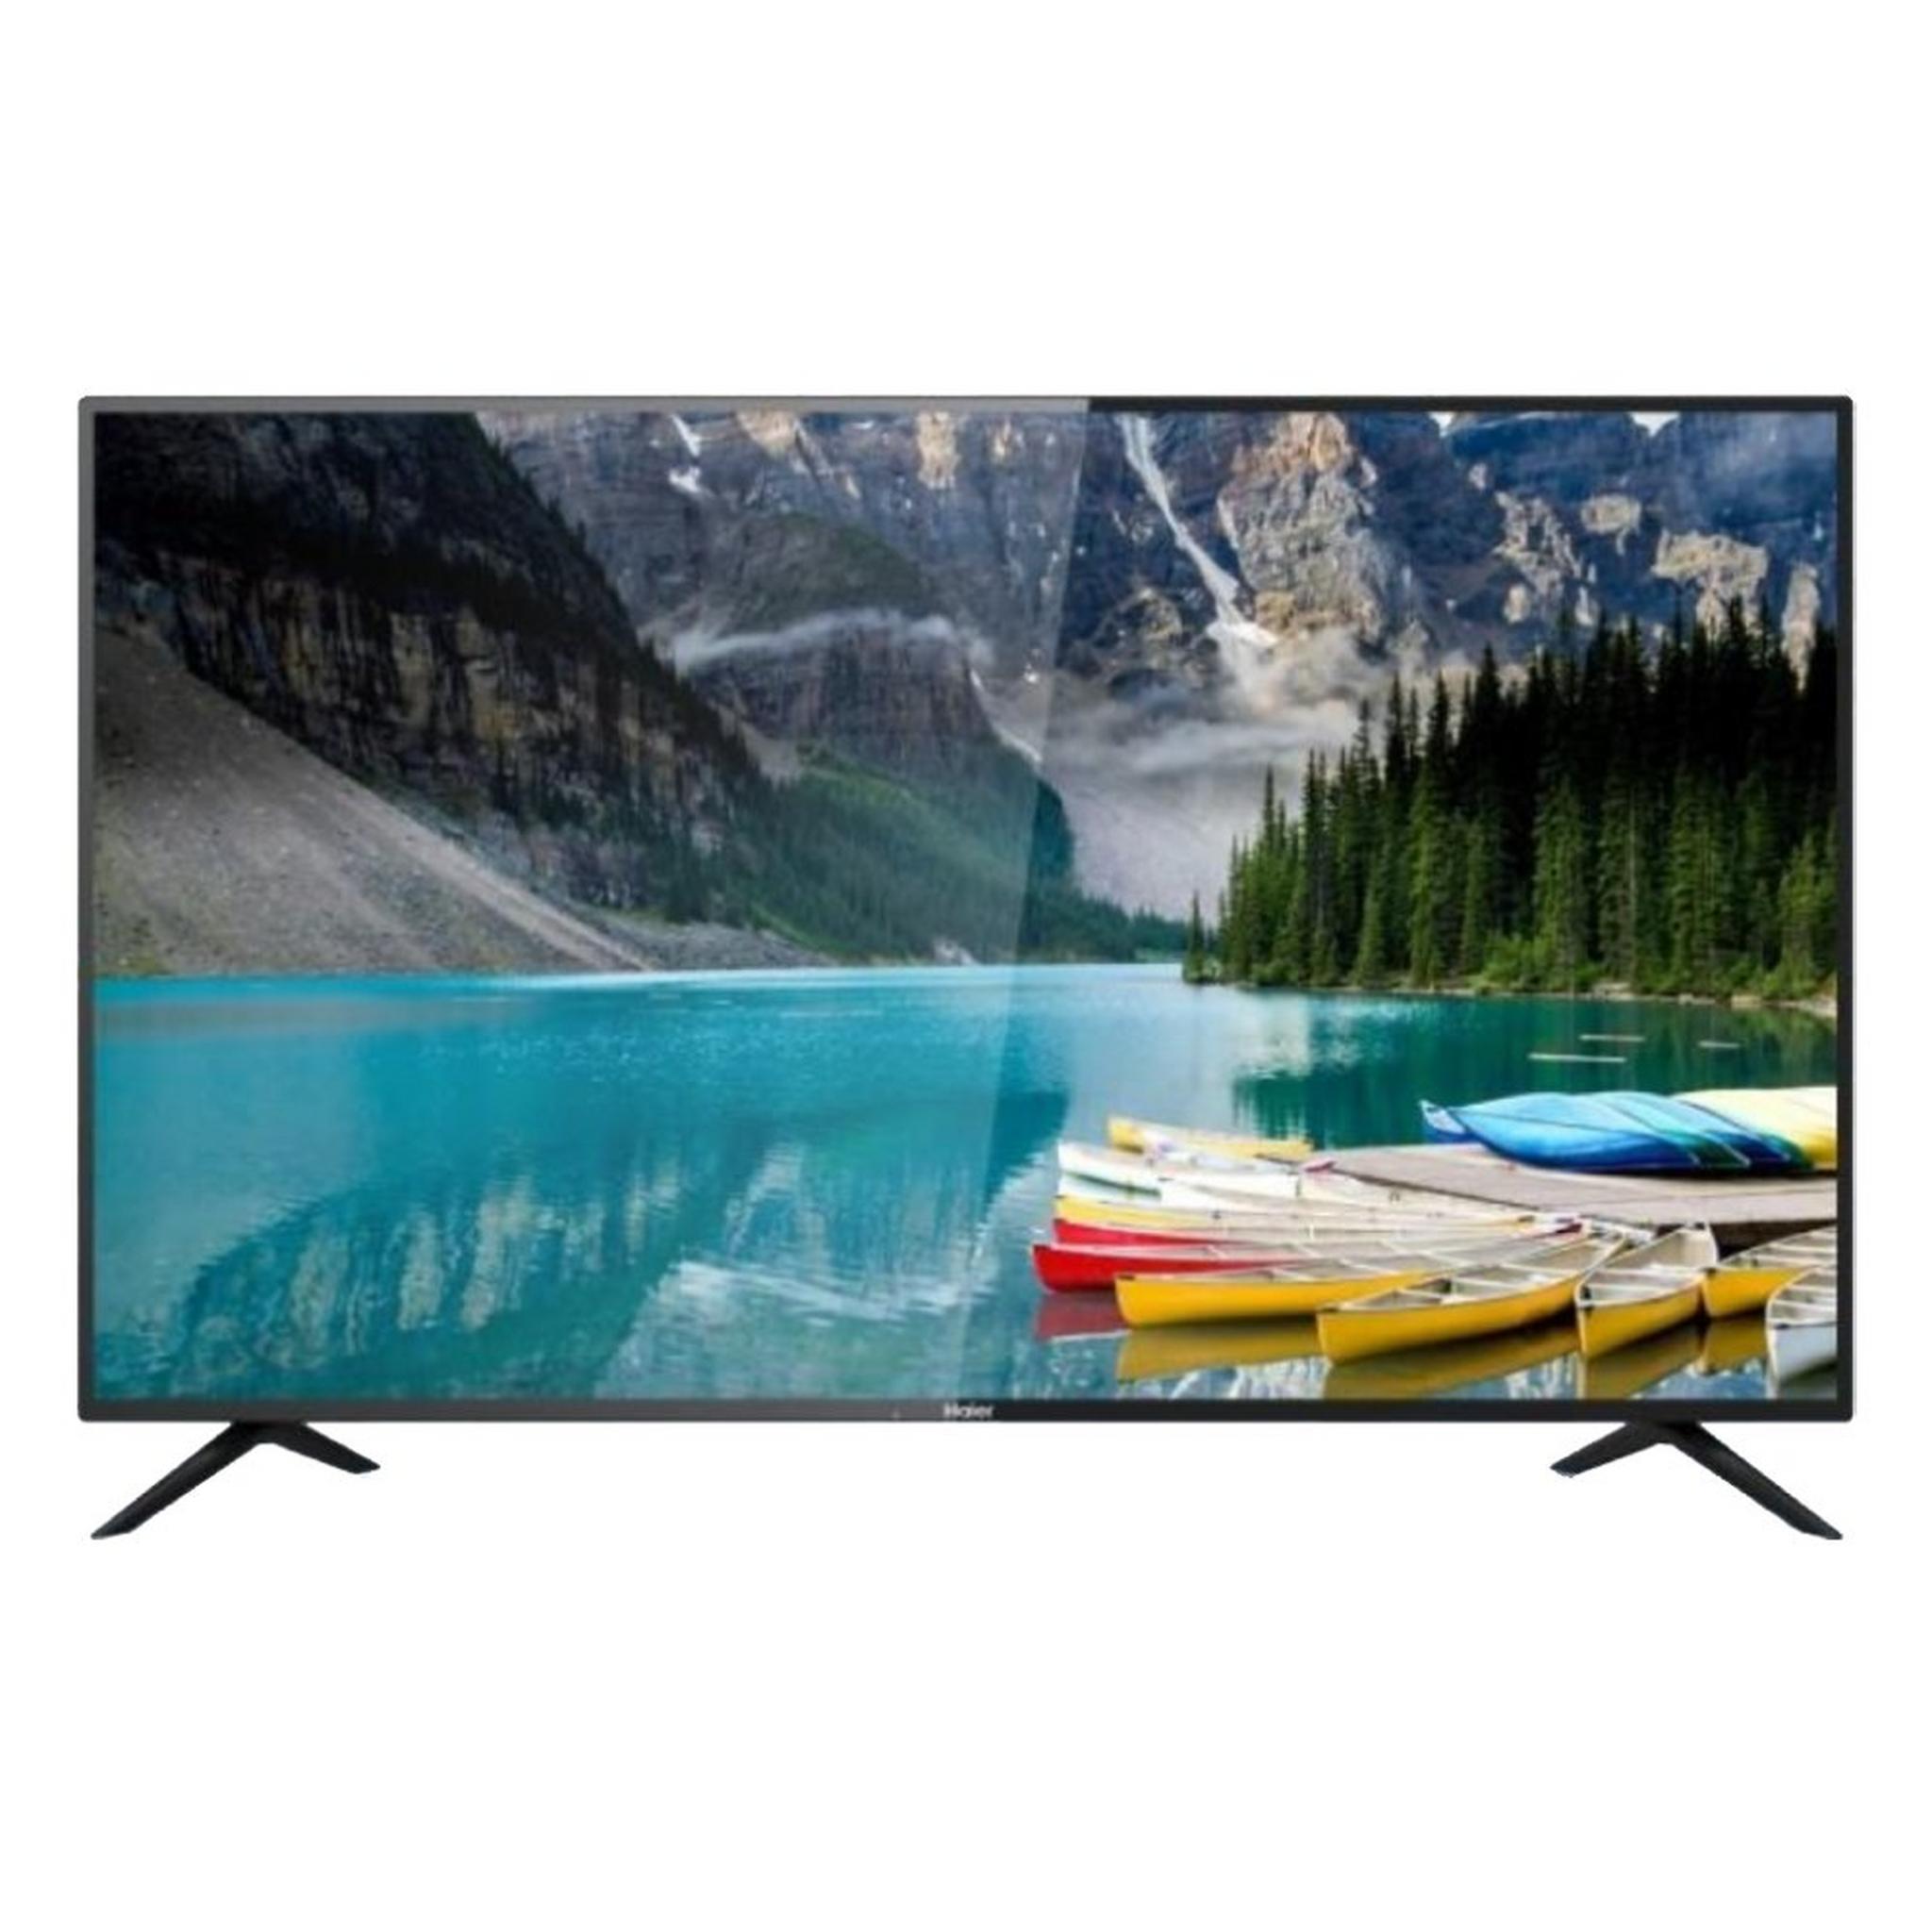 Haier TV 32 inch Android LED 2K HDR , LE32K6600G